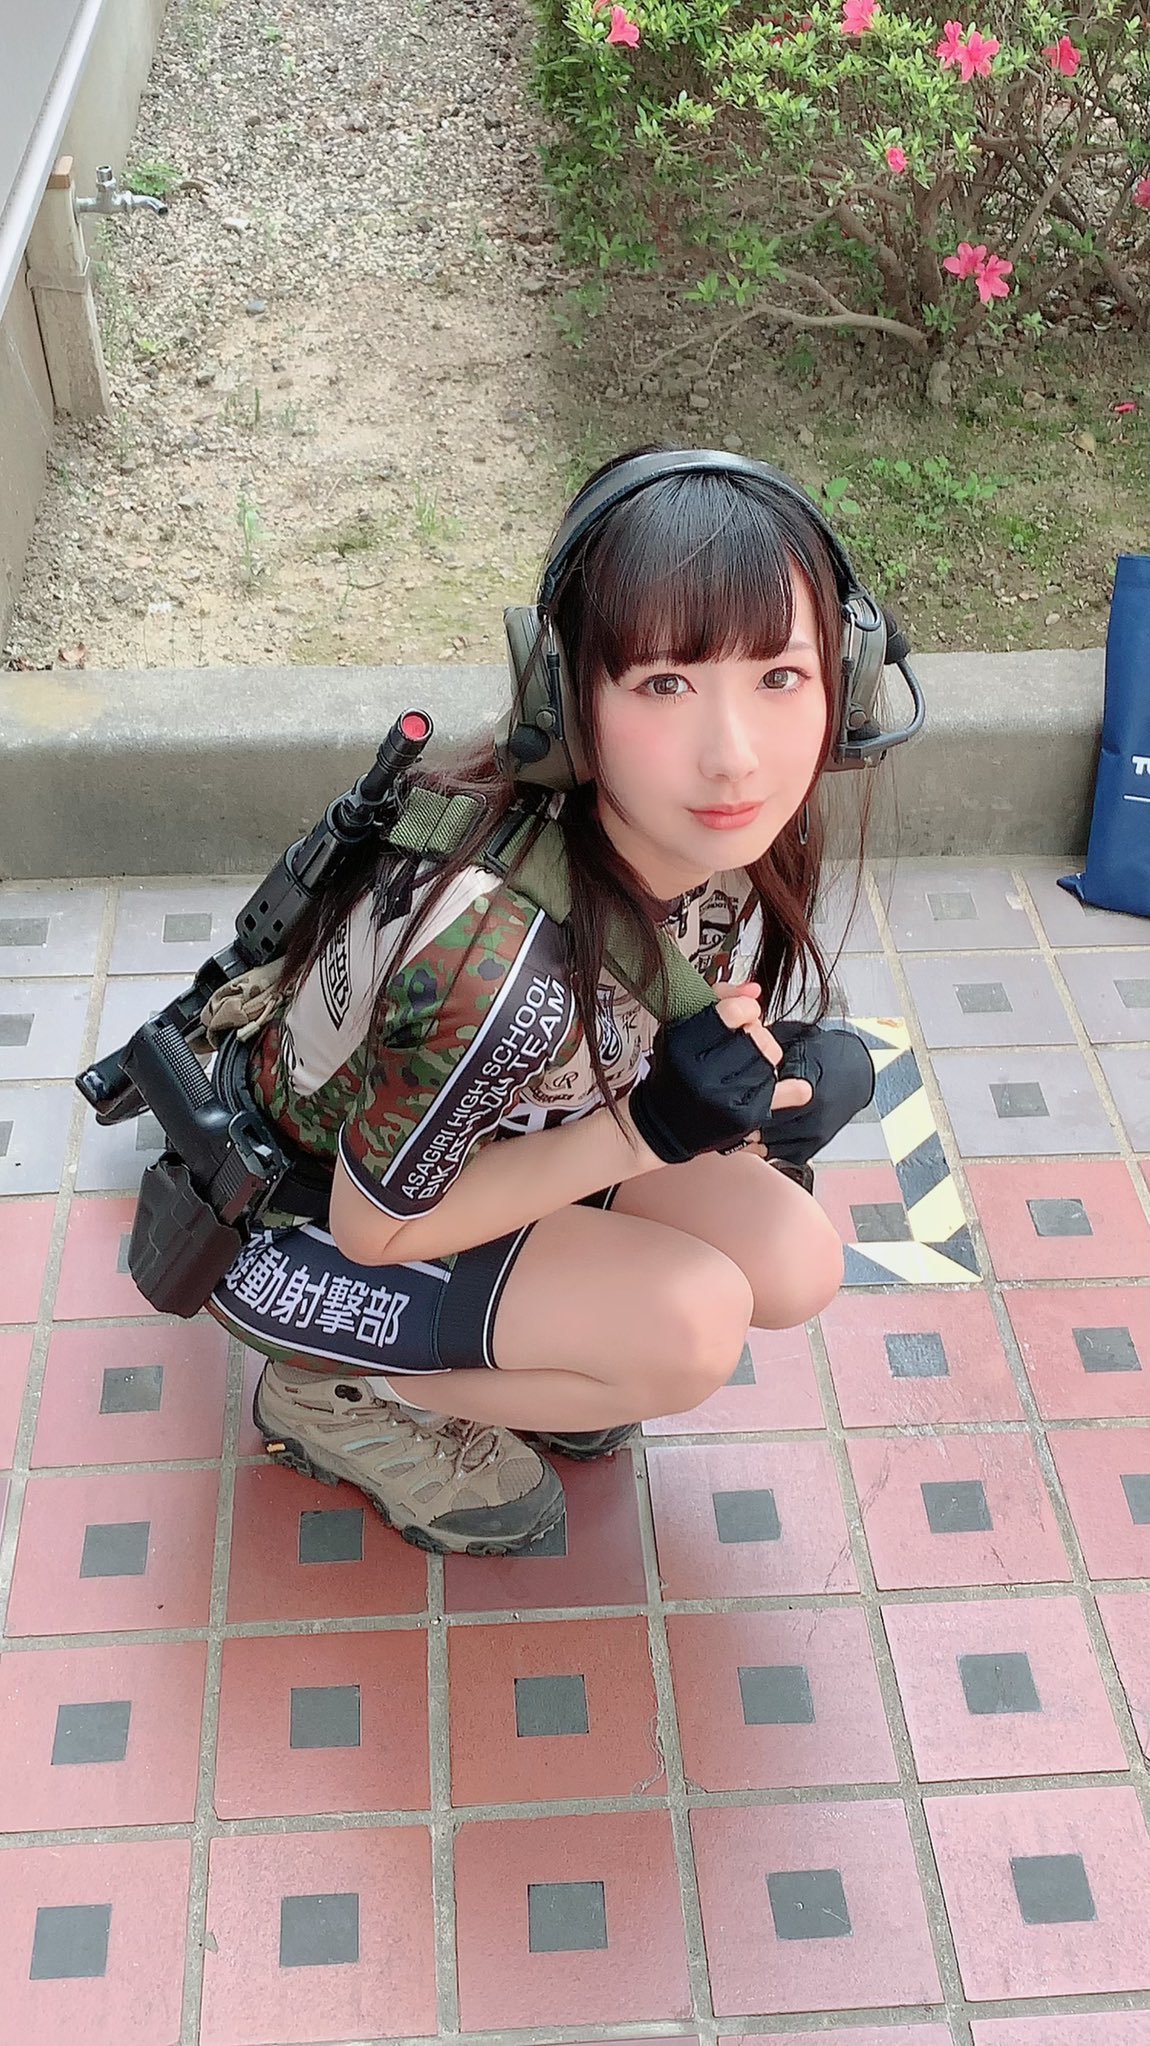 Morning Airsoft Cosplayers Post Pikabu Monster